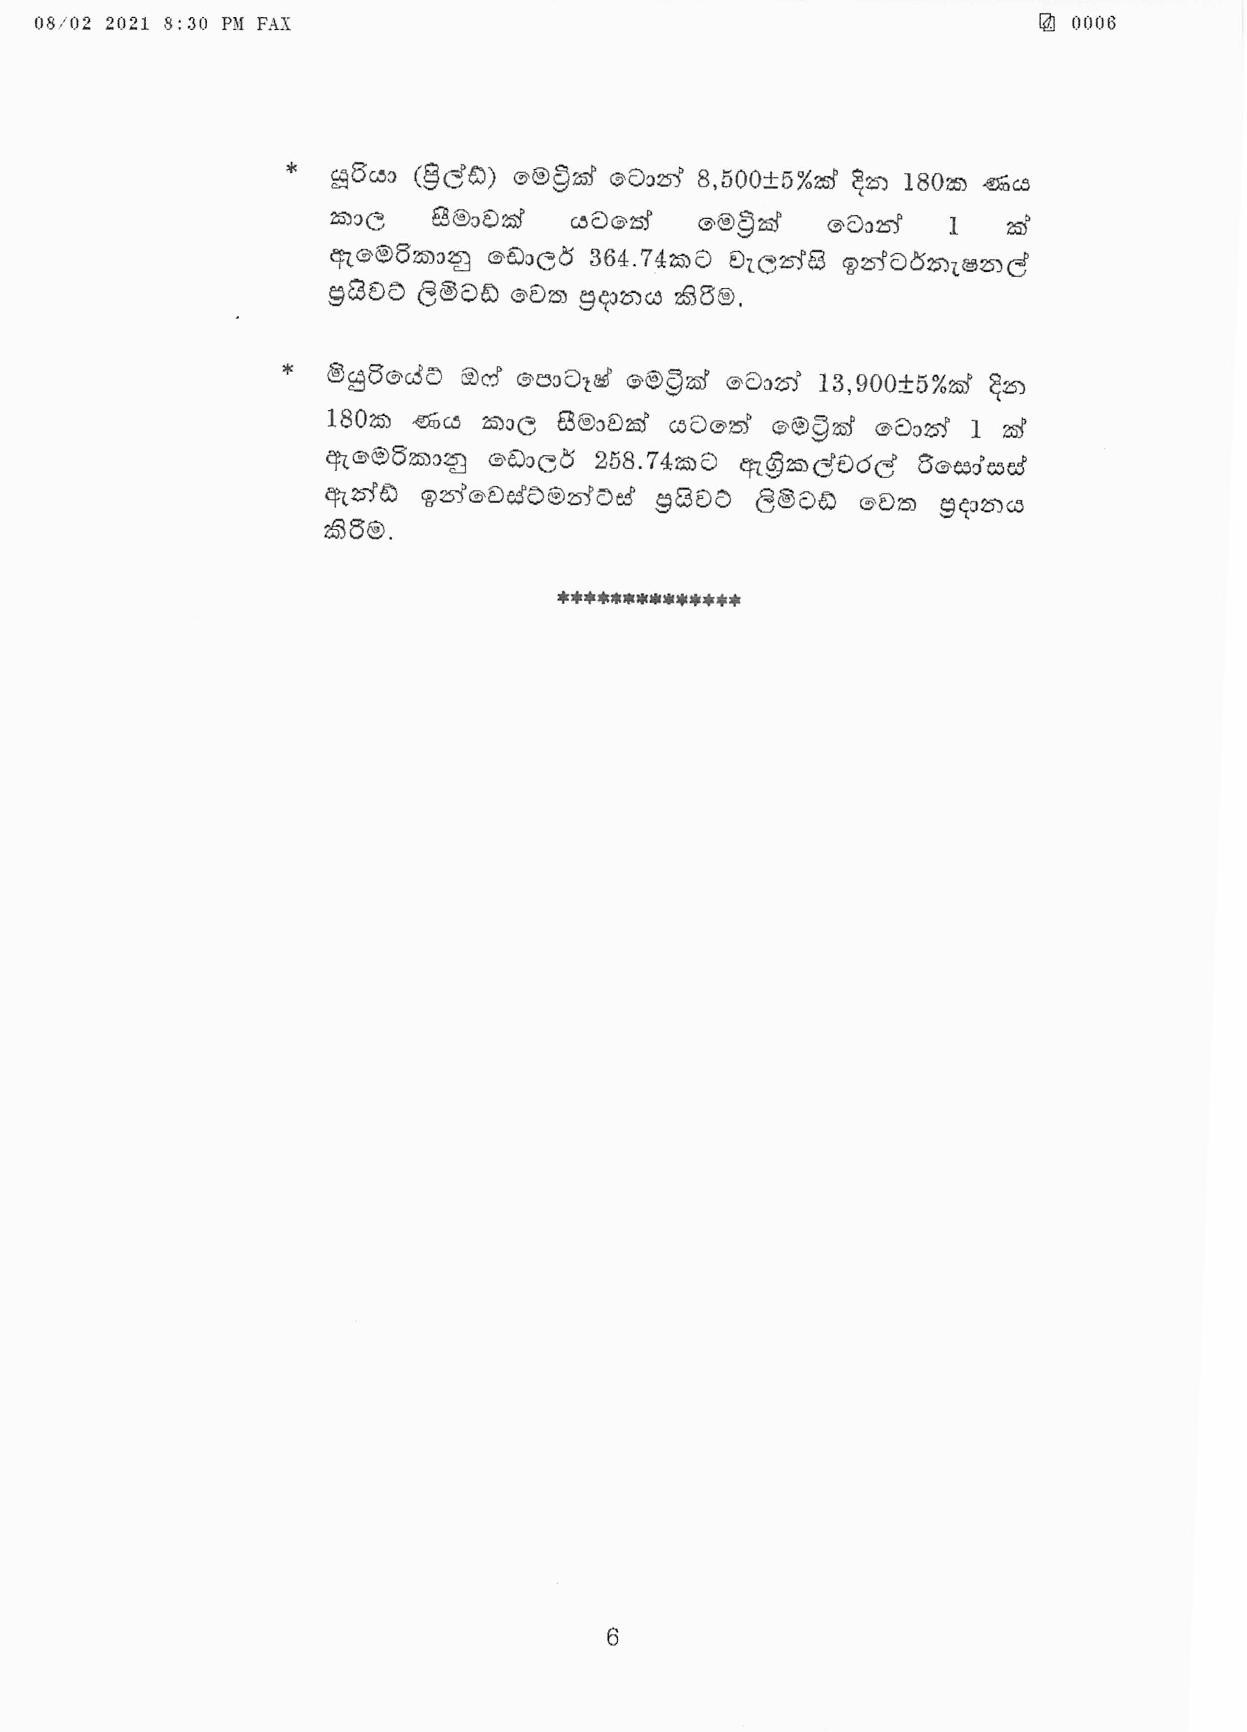 Cabinet Decision on 08.02.2021 page 006